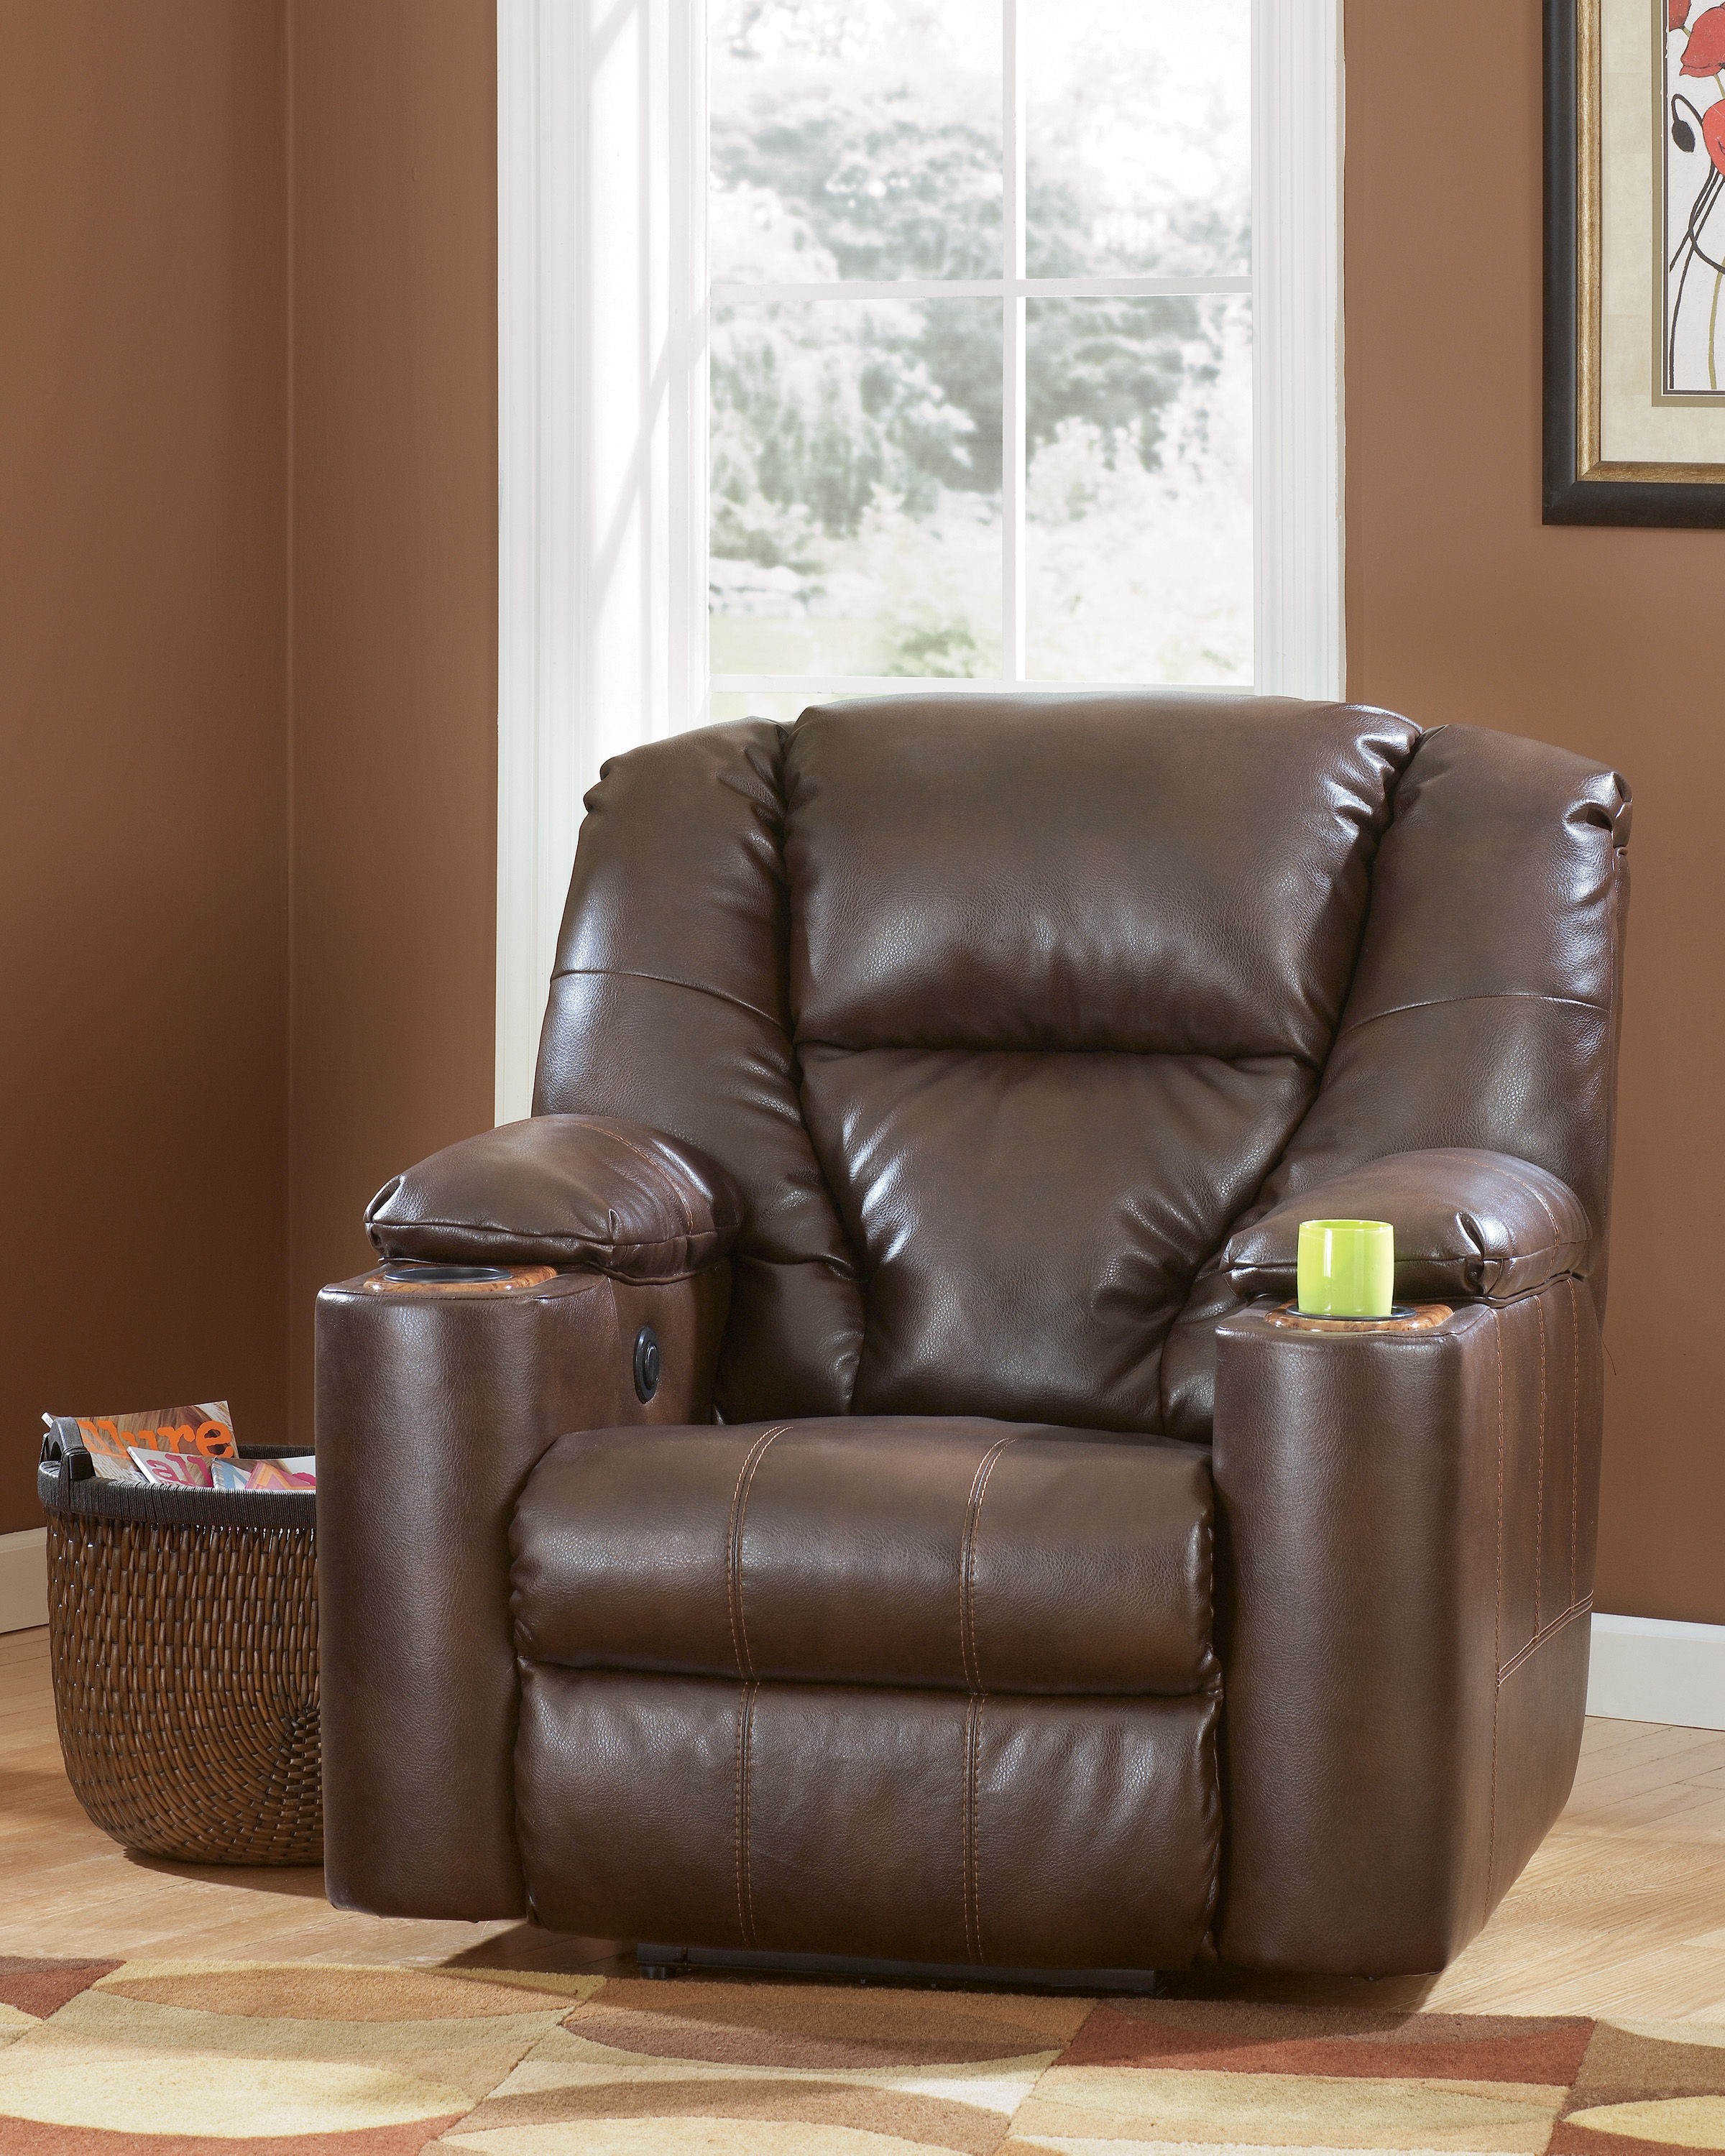 Recliner chair with cup holder